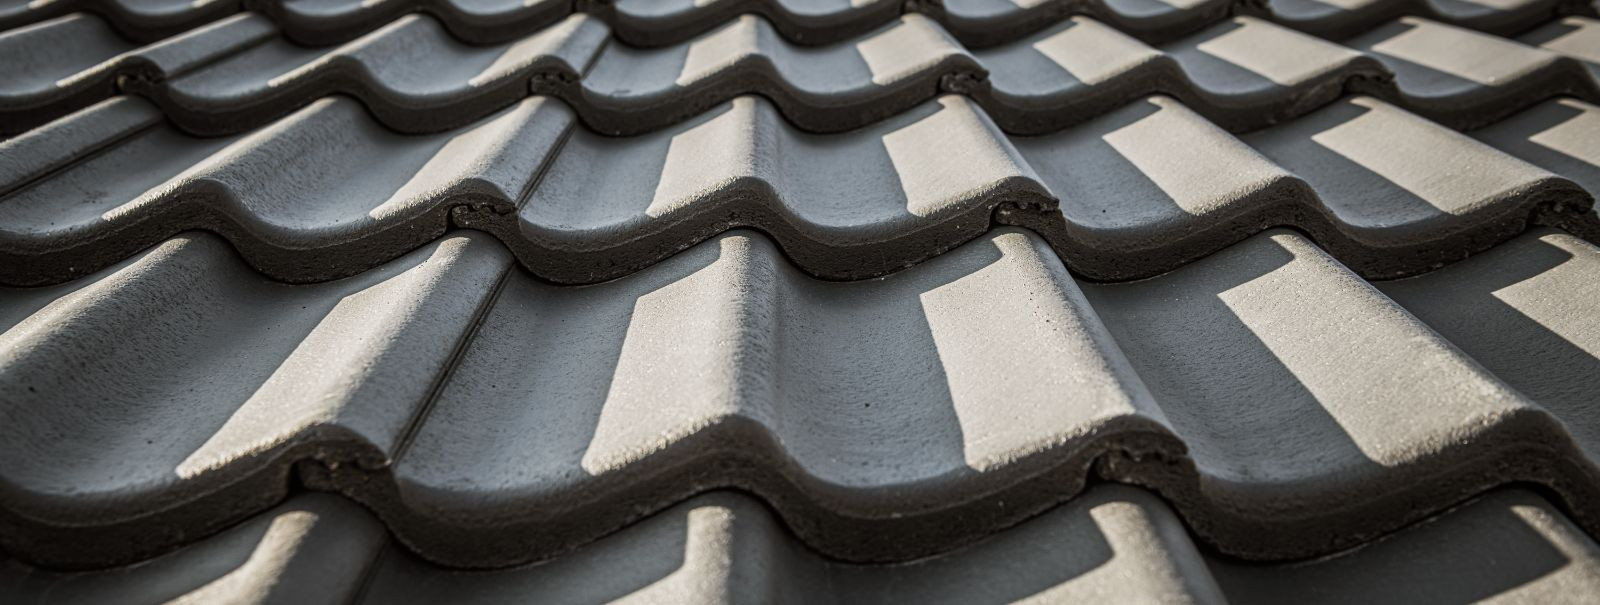 As homeowners become increasingly aware of the importance of sustainability and energy conservation, energy-efficient roofing has emerged as a key component in 